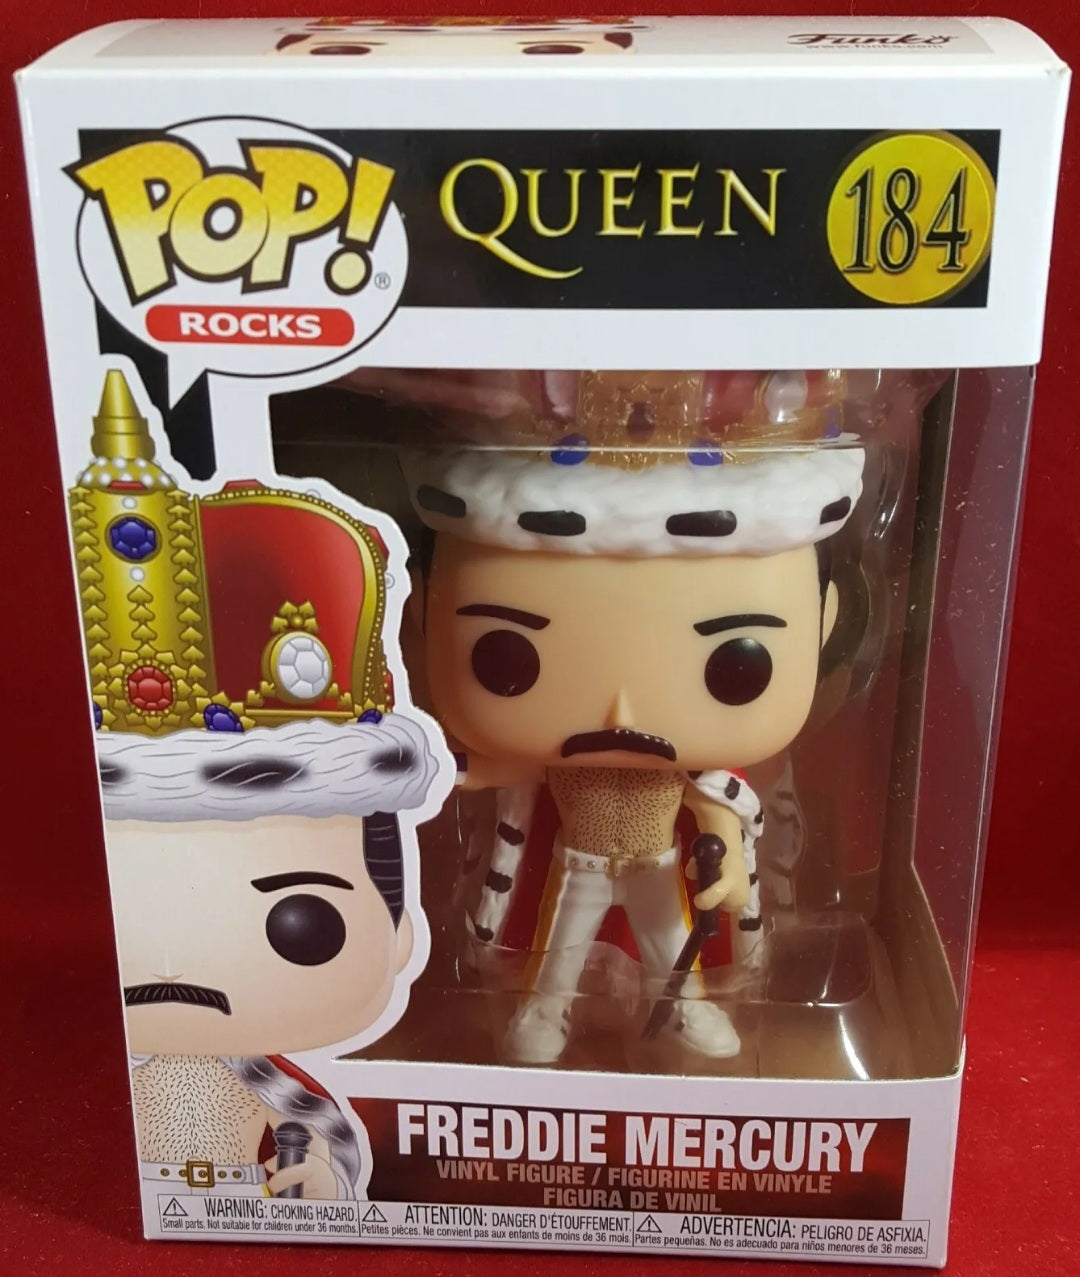 Freddie mercury as king # 184 funko (nib)
Freddie mercury of queen in his king costume. Pop is in near perfect condition. Item will be shipped in a compatible pop protector.